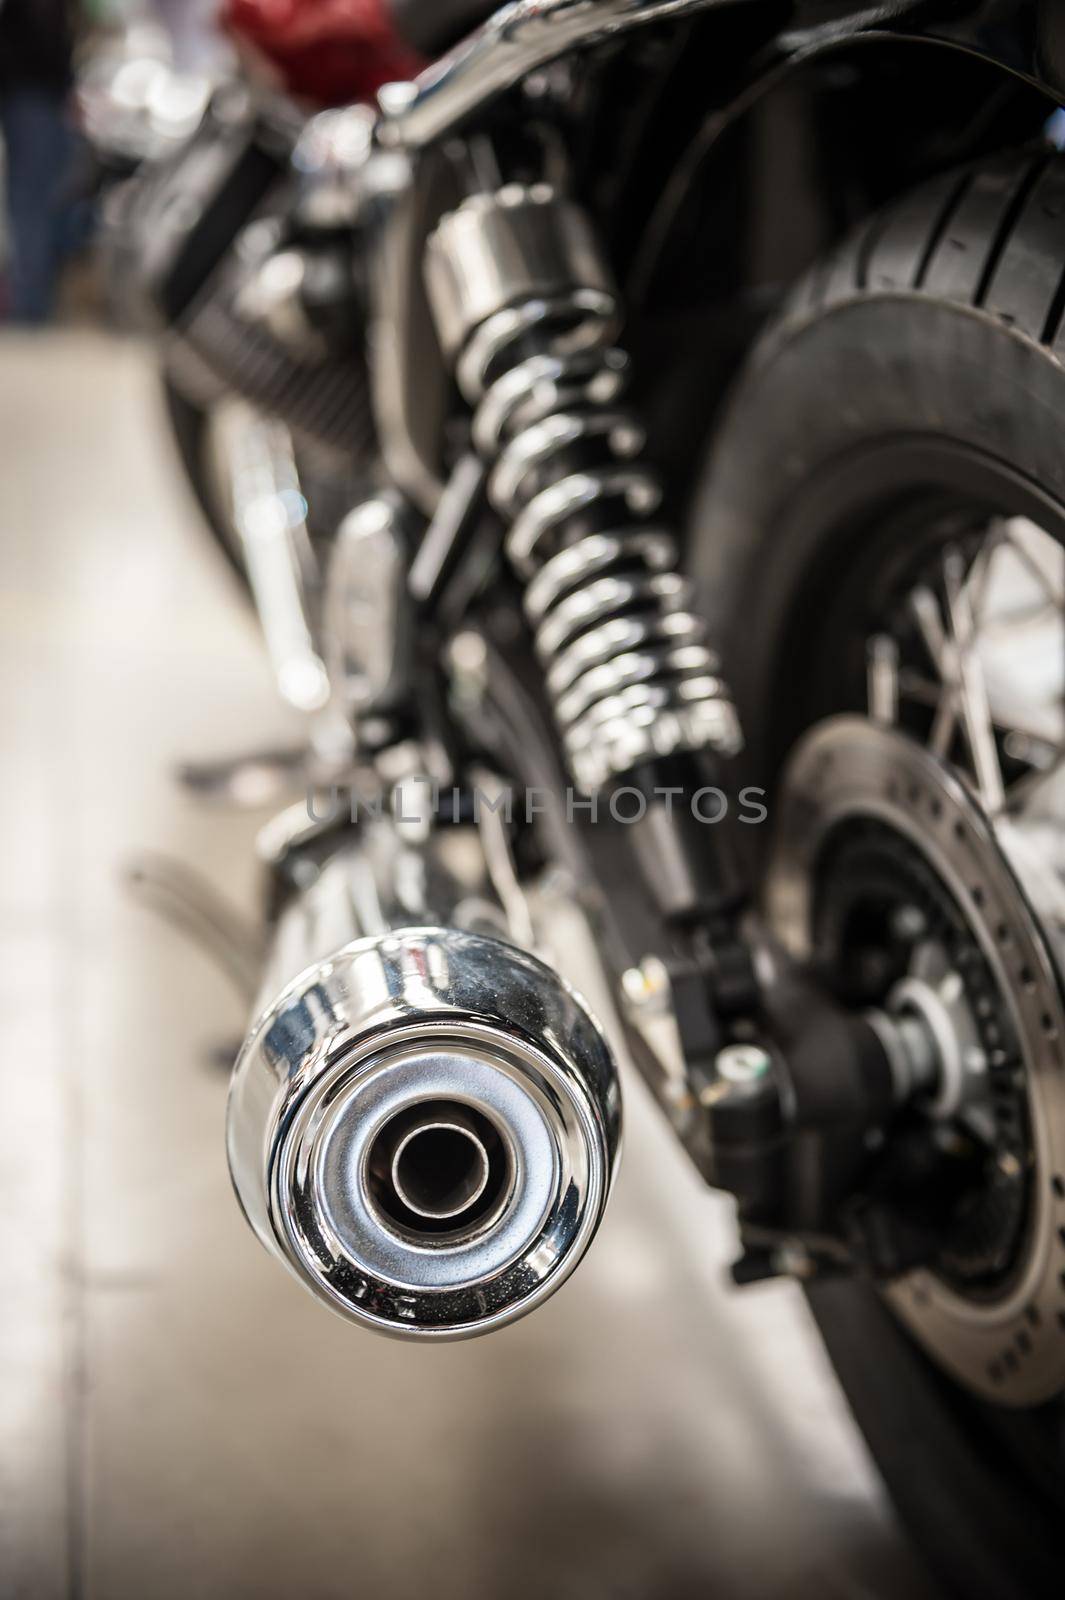 Chrome exhaust pipe of a beautiful motorcycle